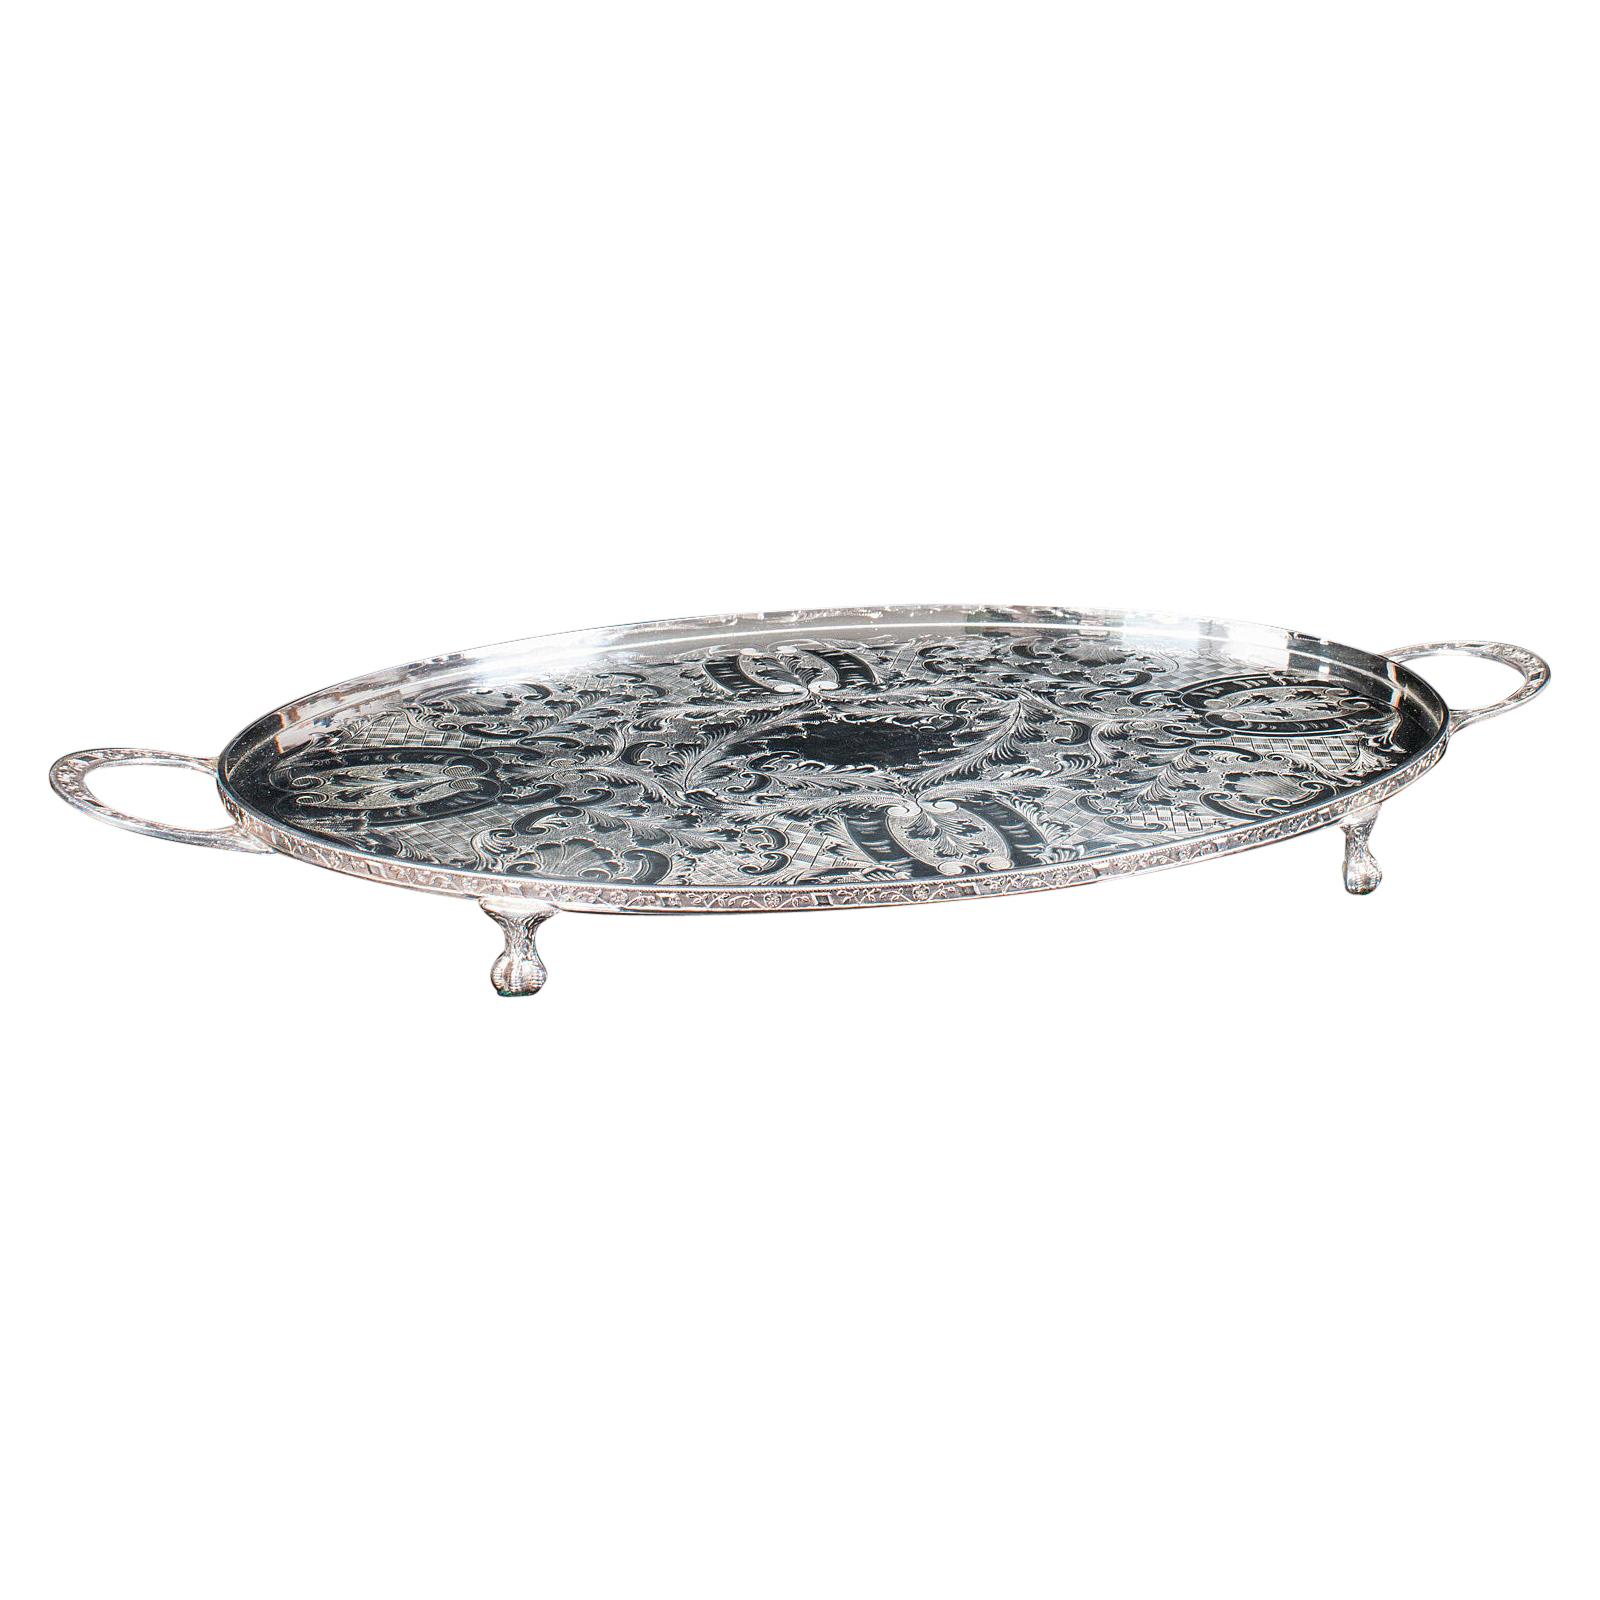 Vintage Oval Serving Tray, English, Silver Plate, Afternoon Tea, Viners, C.1950 For Sale